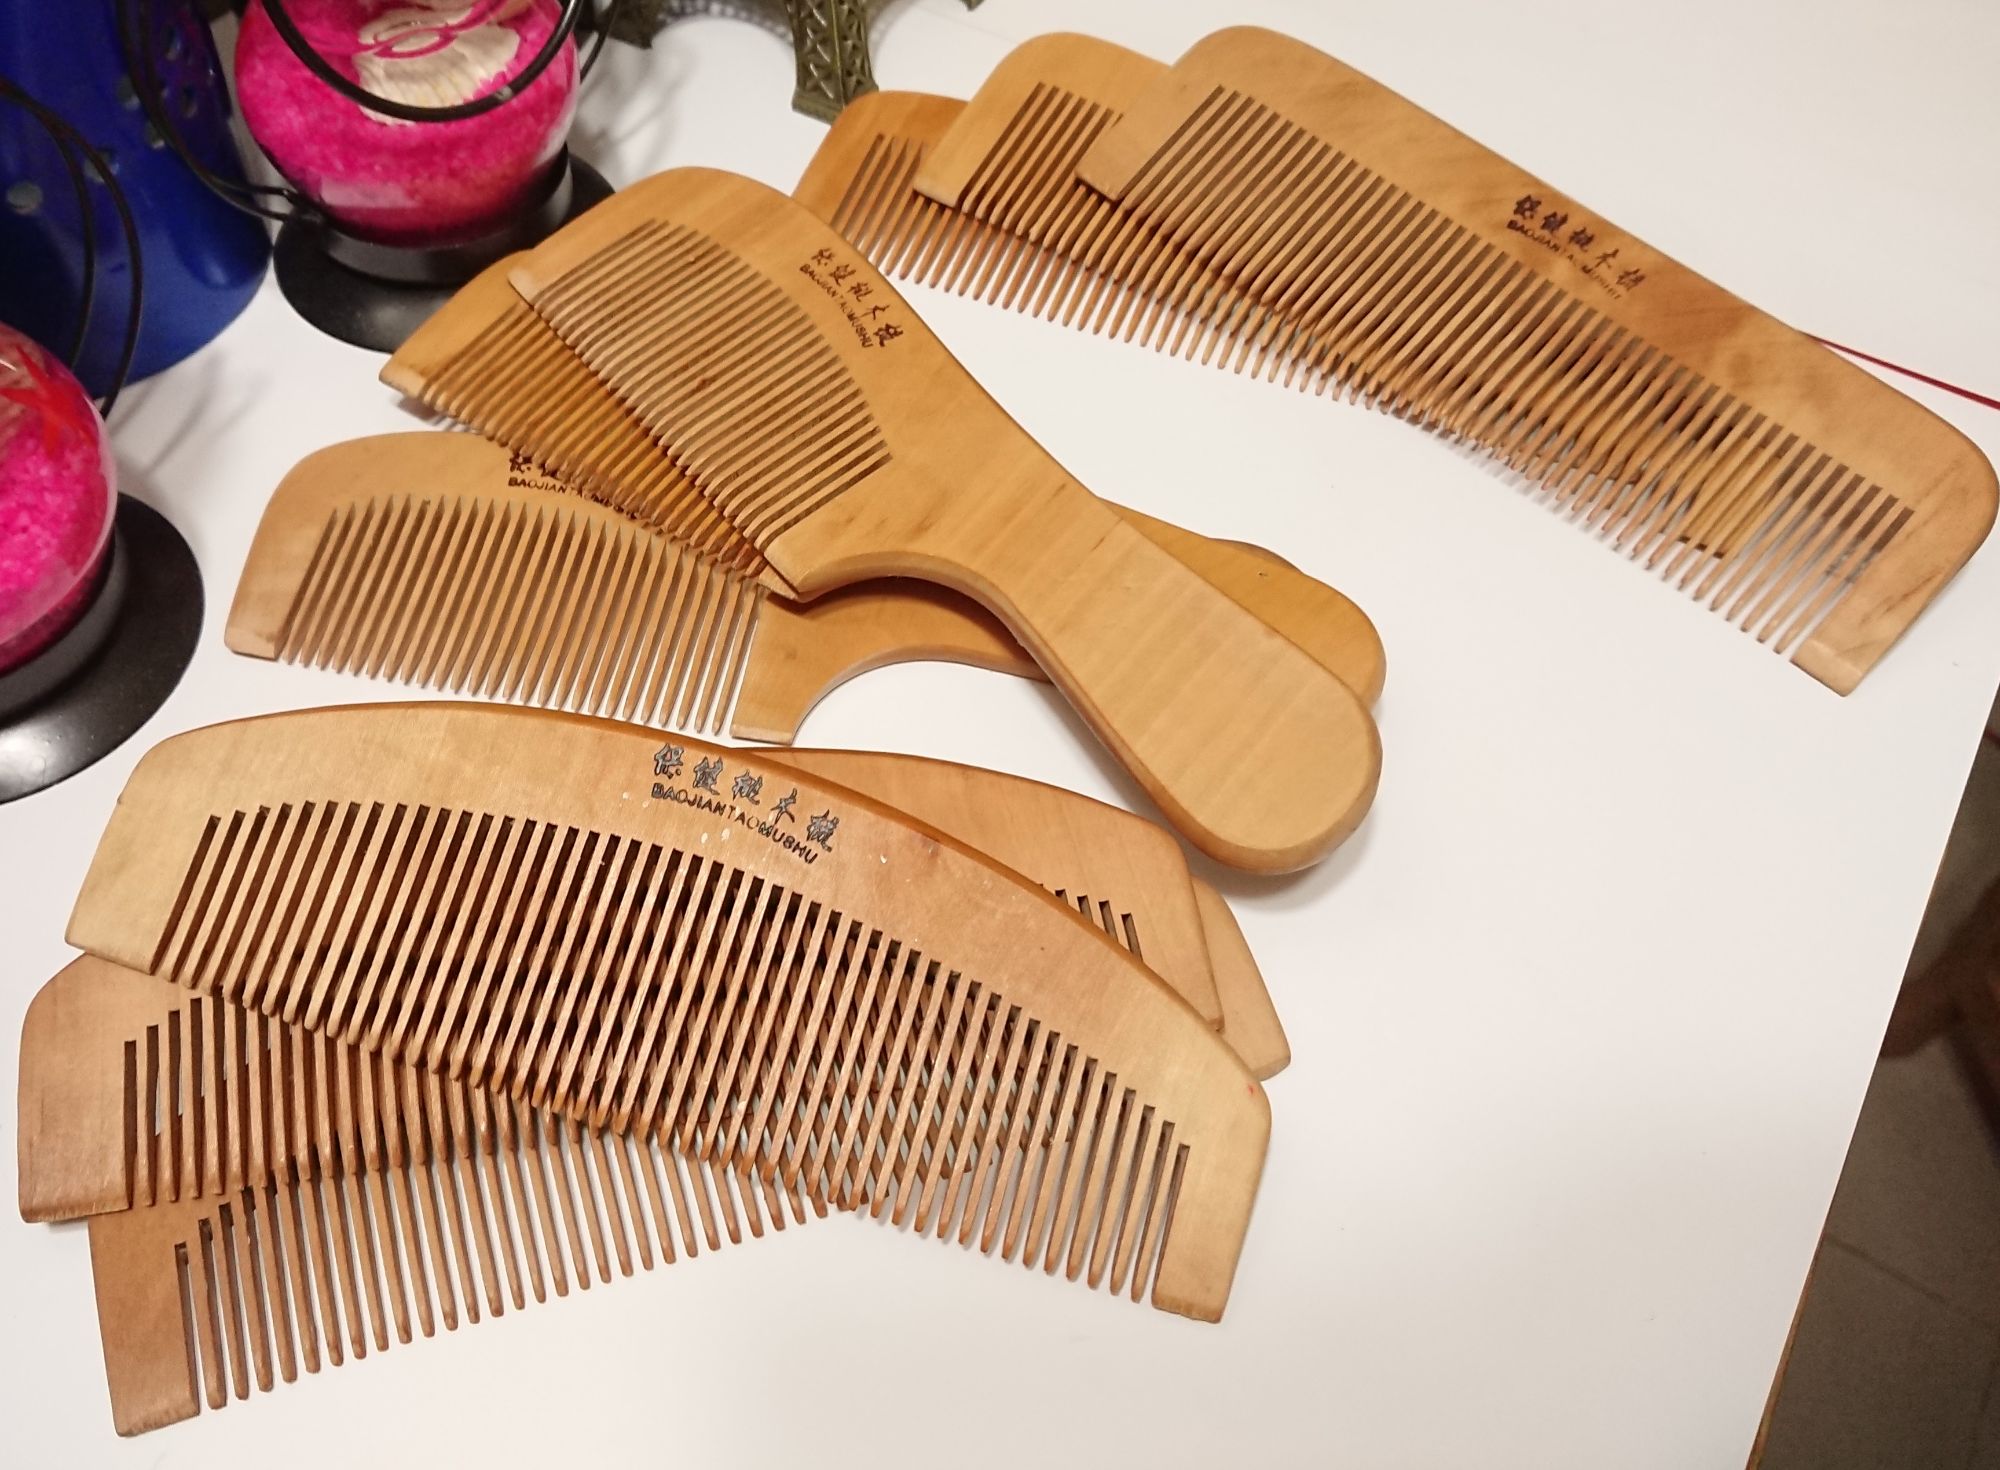 Wooden Hair Brush/Comb/Chiron Set Of 3 pieces